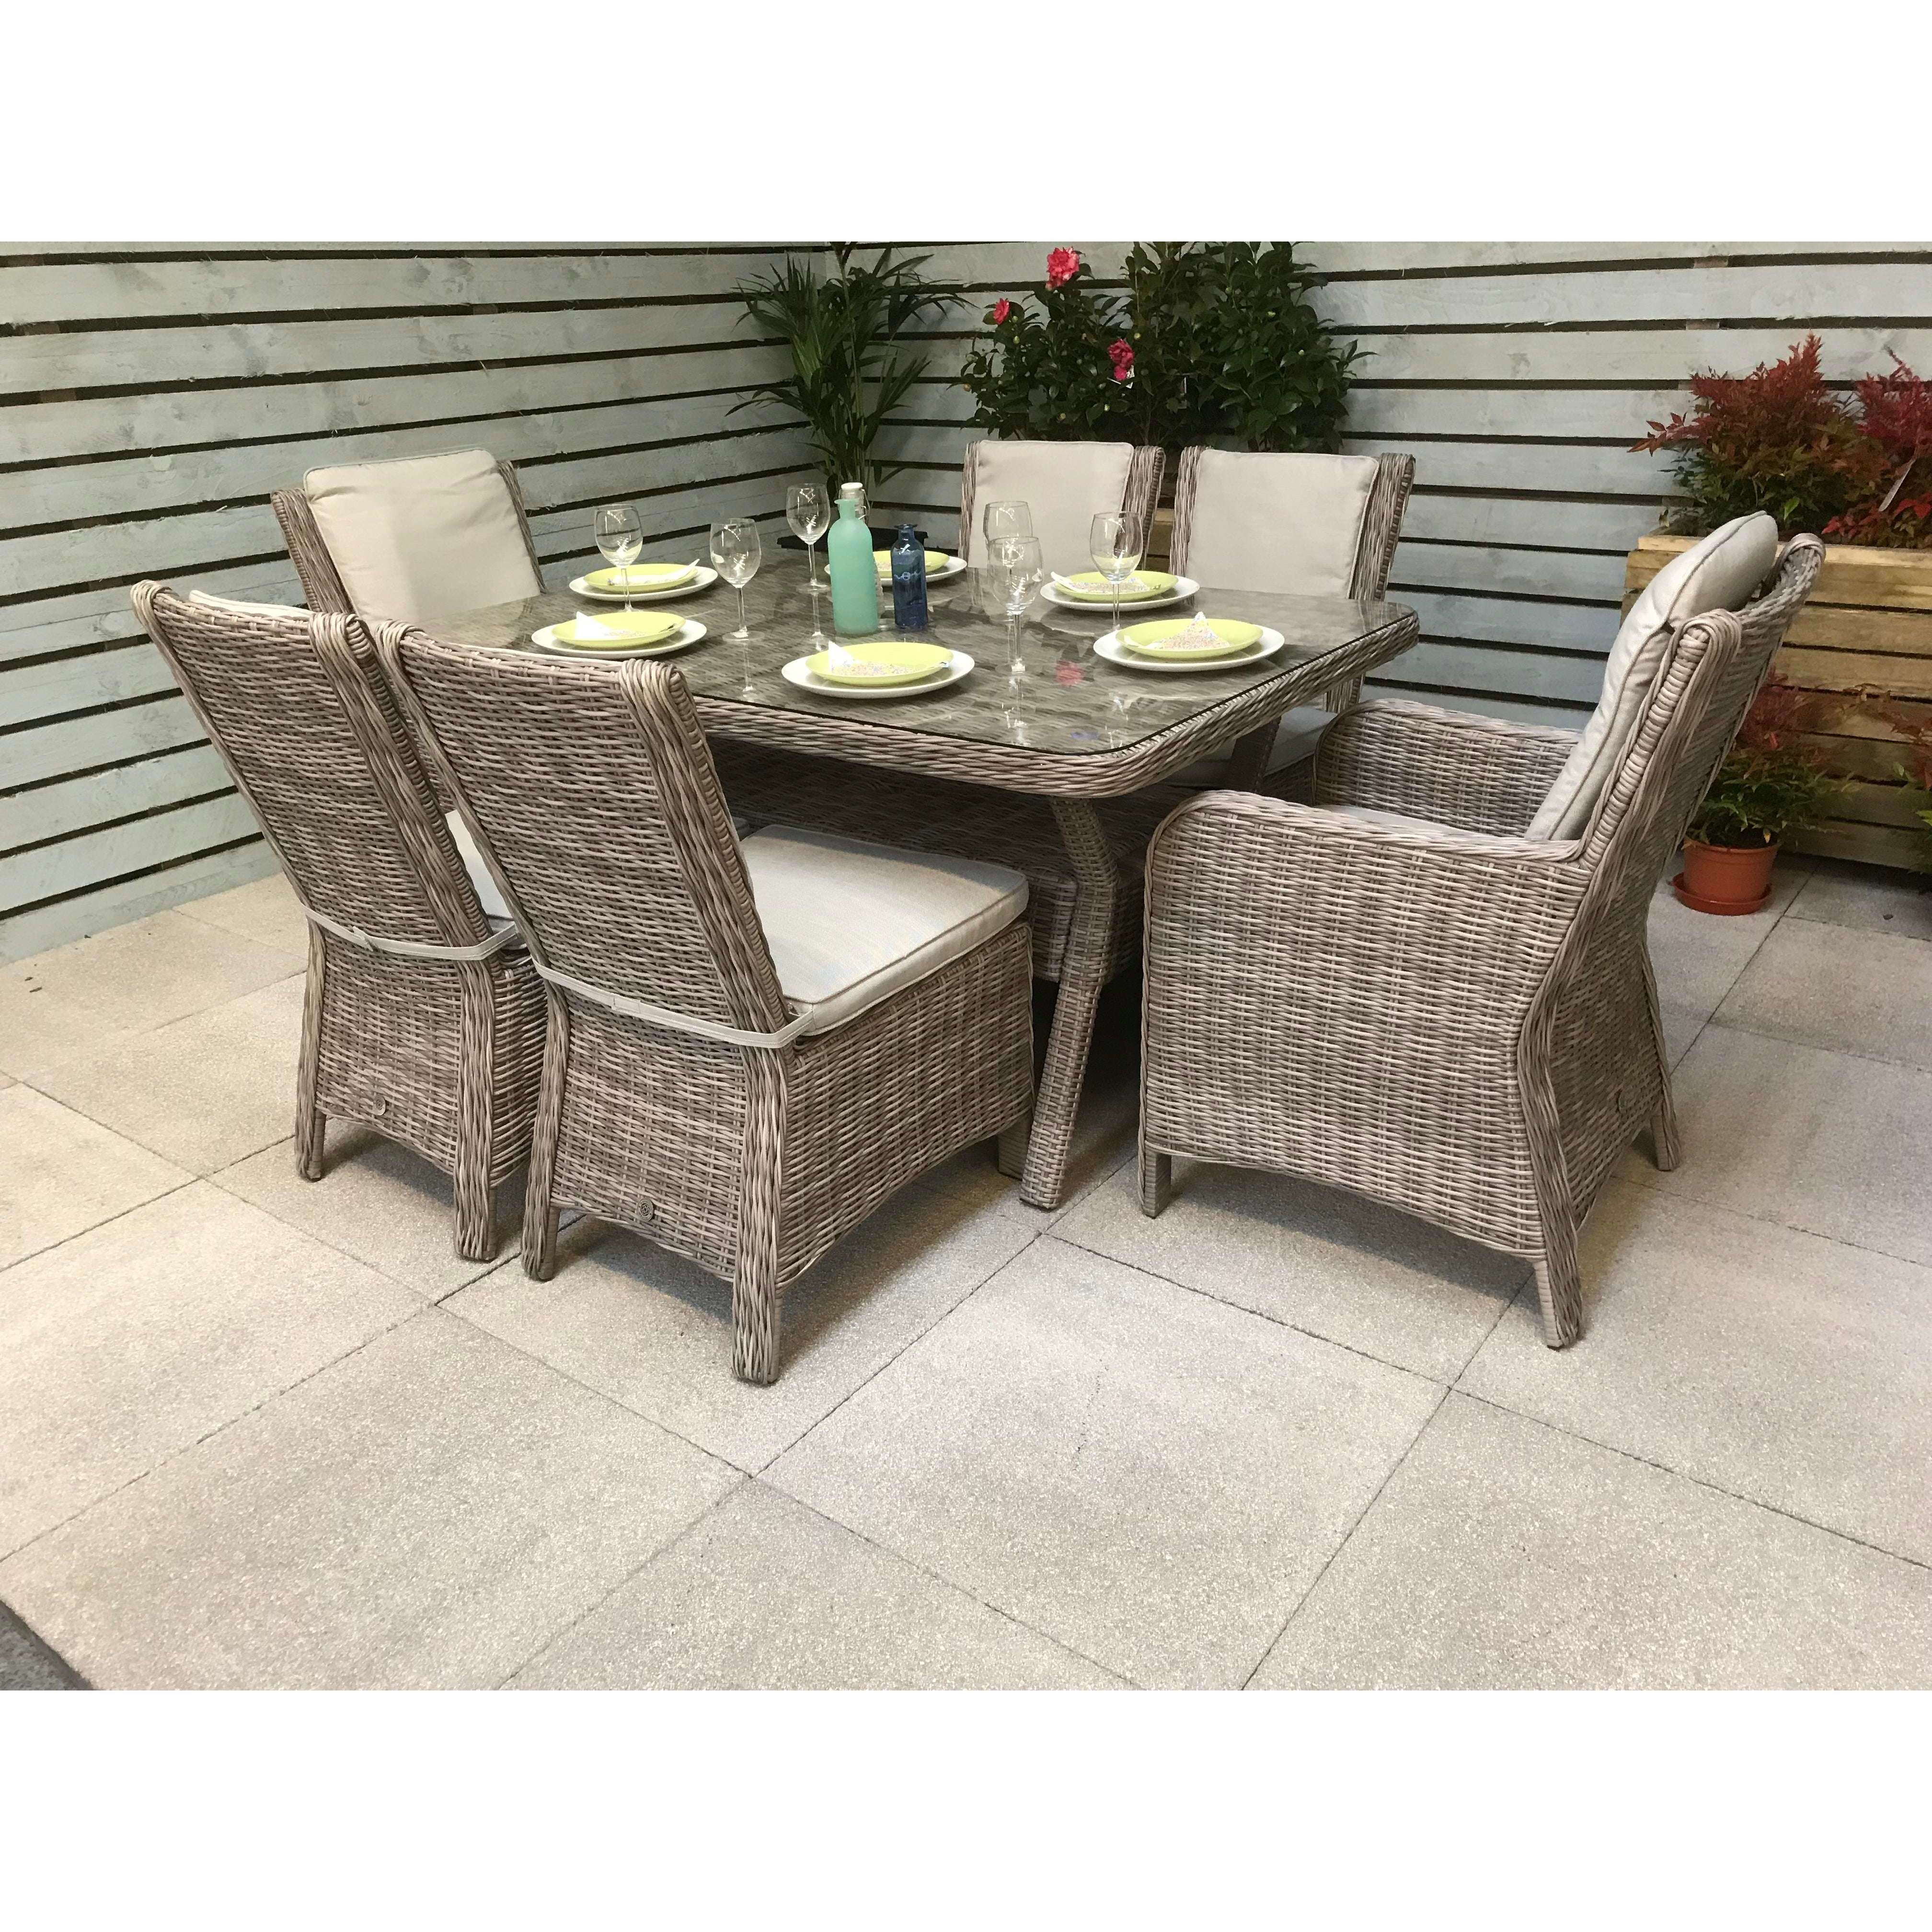 Exceptional Garden:Signature Weave Alexandra 6-Seater Dining Set with Rectangular Dining Table